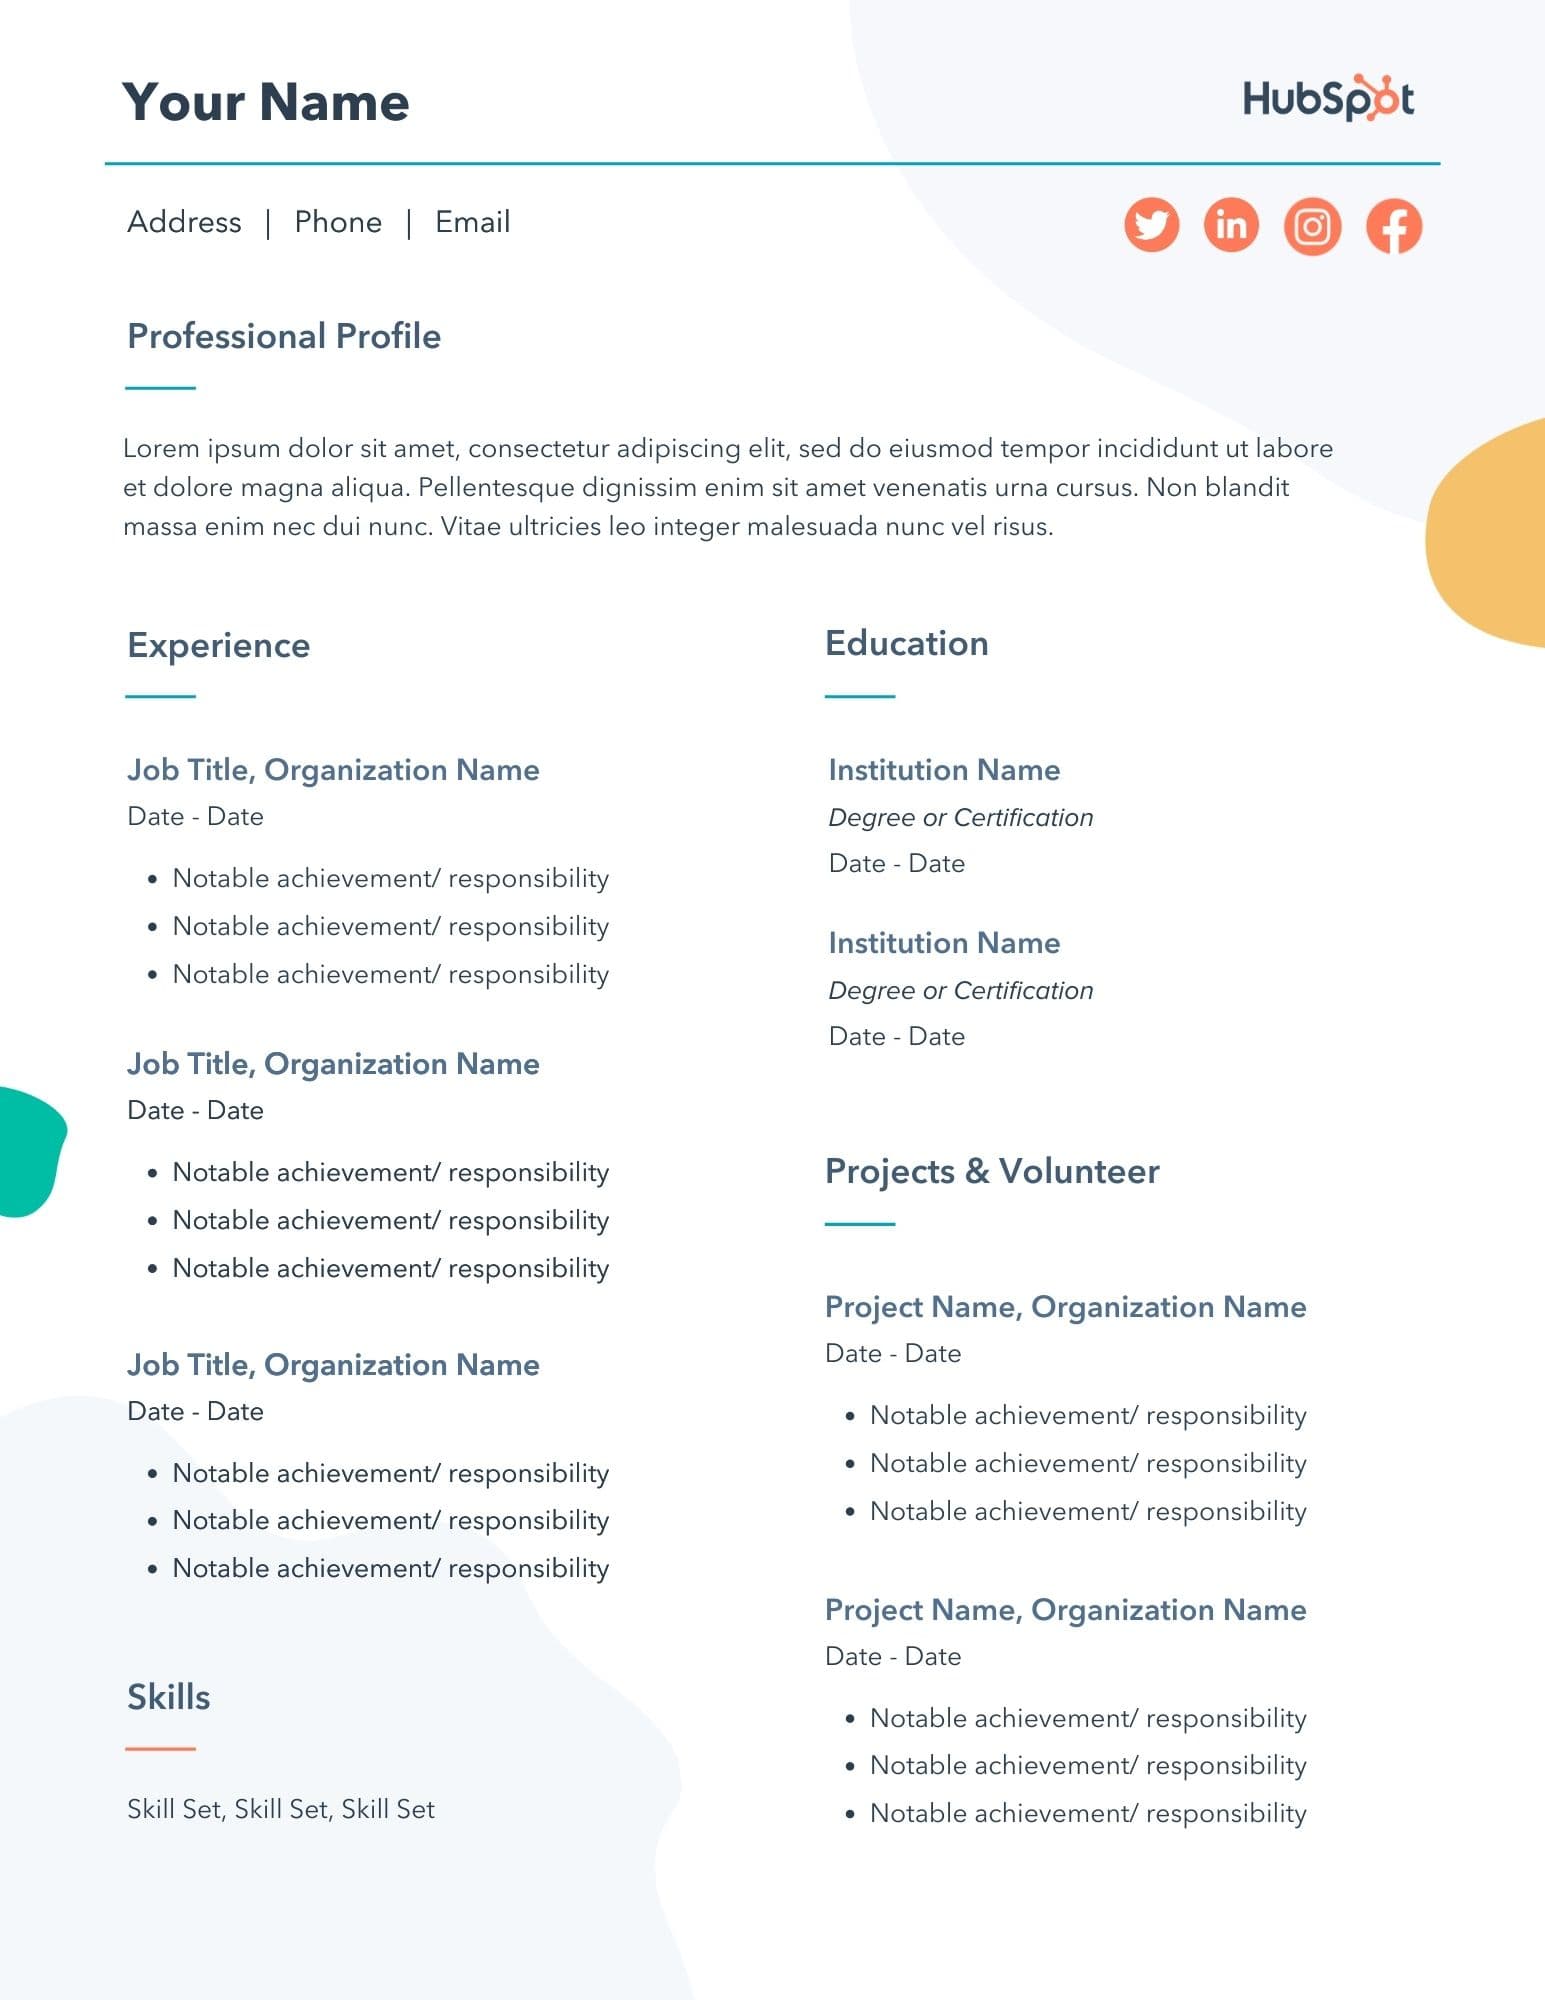 29 Free Resume Templates for Microsoft Word (& How to Make Your Own) IAC